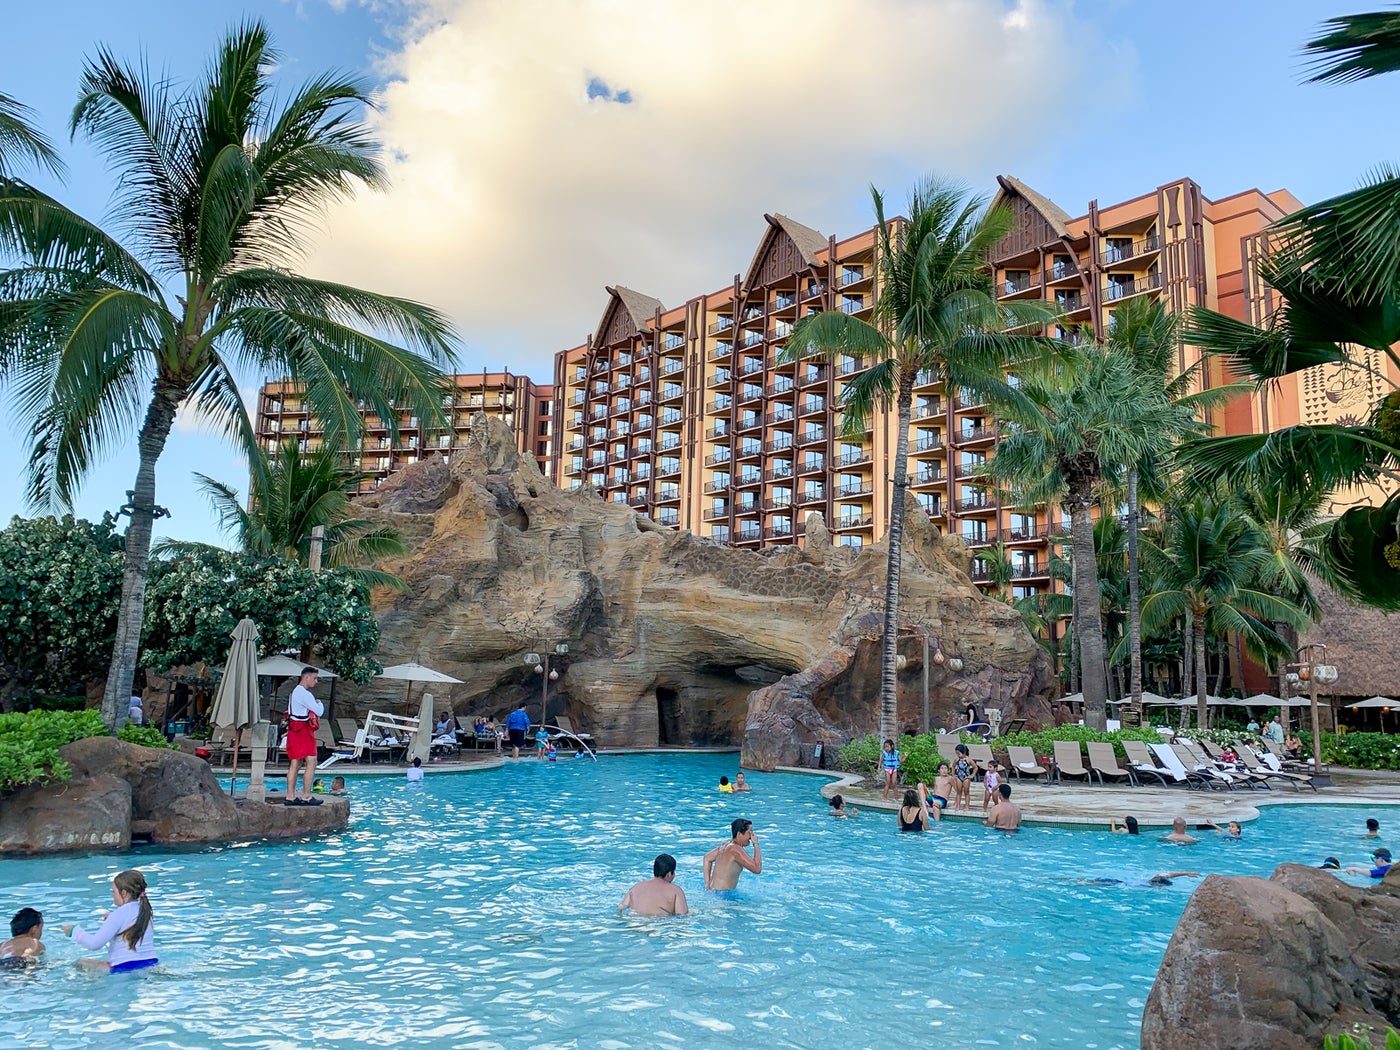 A Review Of Disney S Aulani Resort And Spa In Hawaii